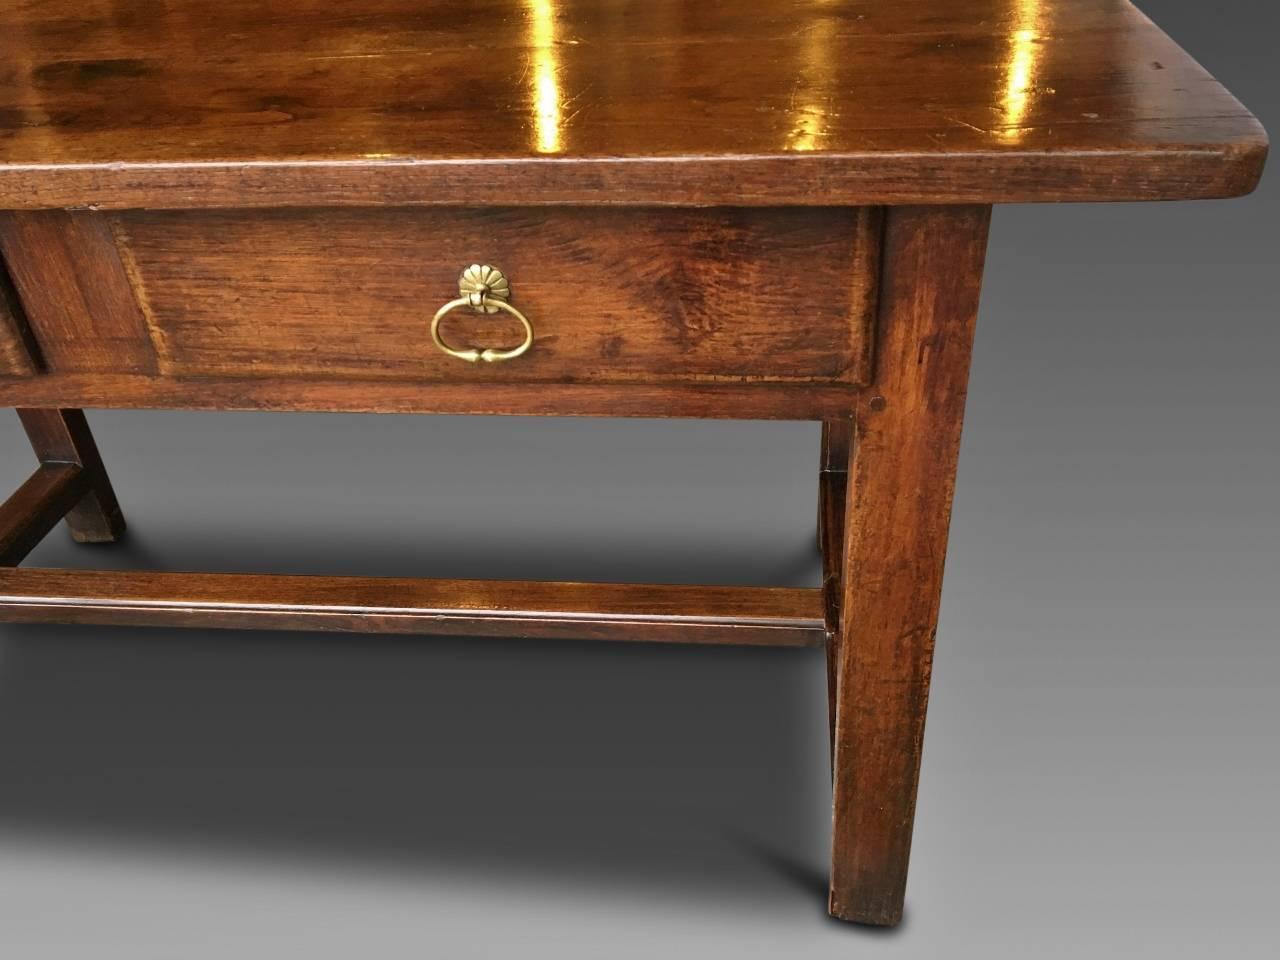 A most attractive mellow oak serving table / side table from the early circa 1800s.
This table is French and in excellent condition. Pegged and jointed, all the joints are strong and firm. The drawers run smoothly and have their original brass